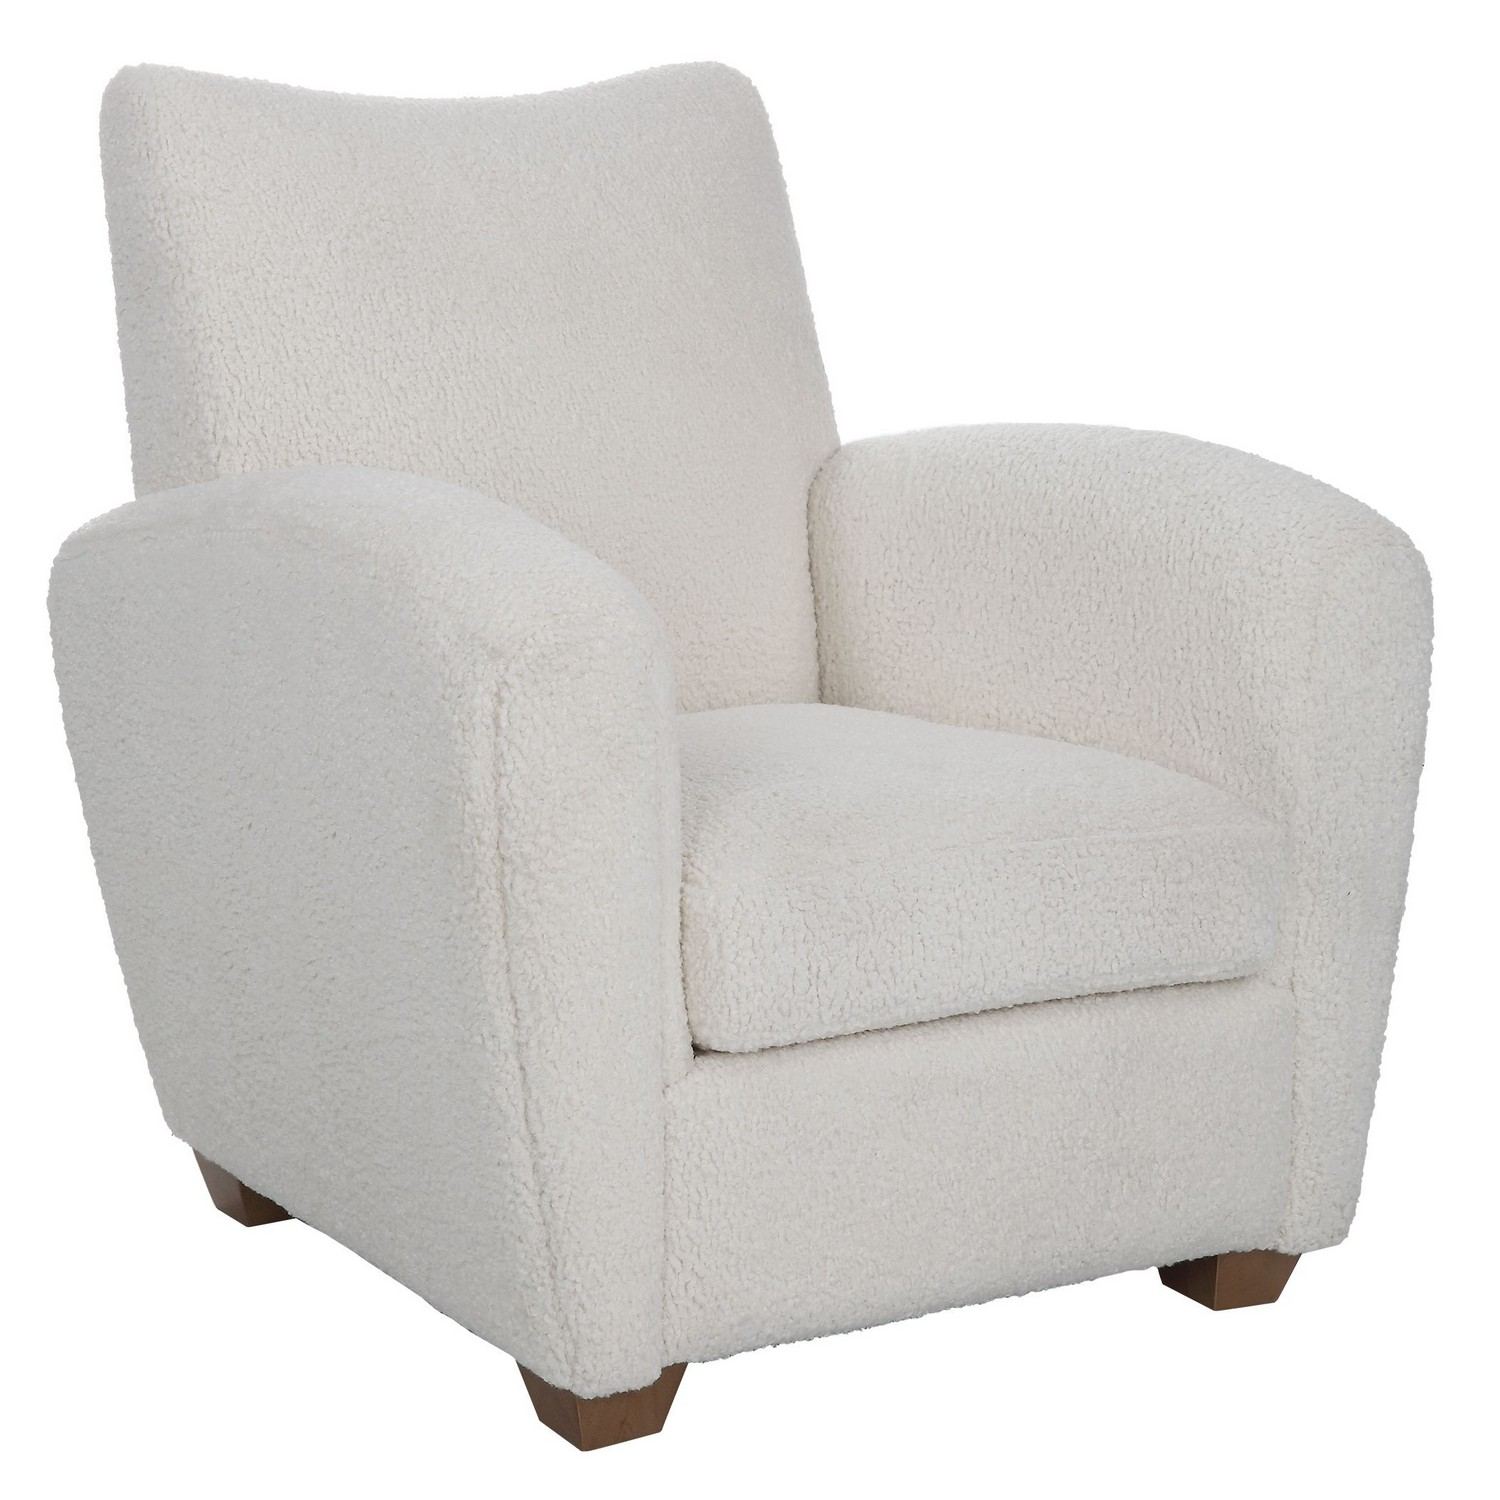 Uttermost Teddy Shearling Accent Chair - White